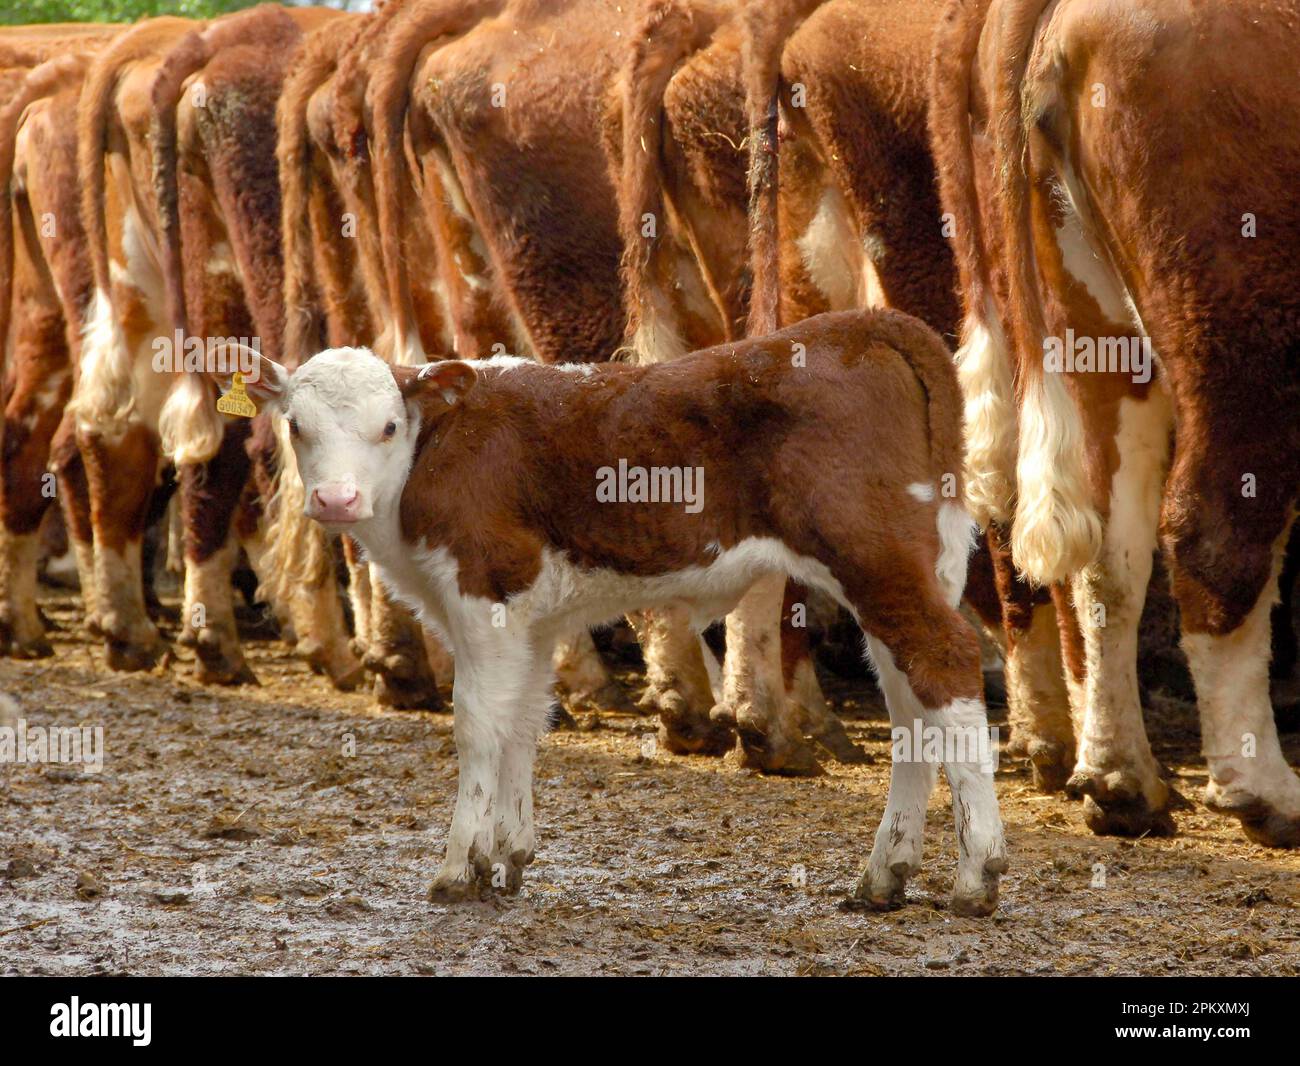 Domestic cattle, Hereford herd, calf standing behind row of cows, England, Great Britain Stock Photo